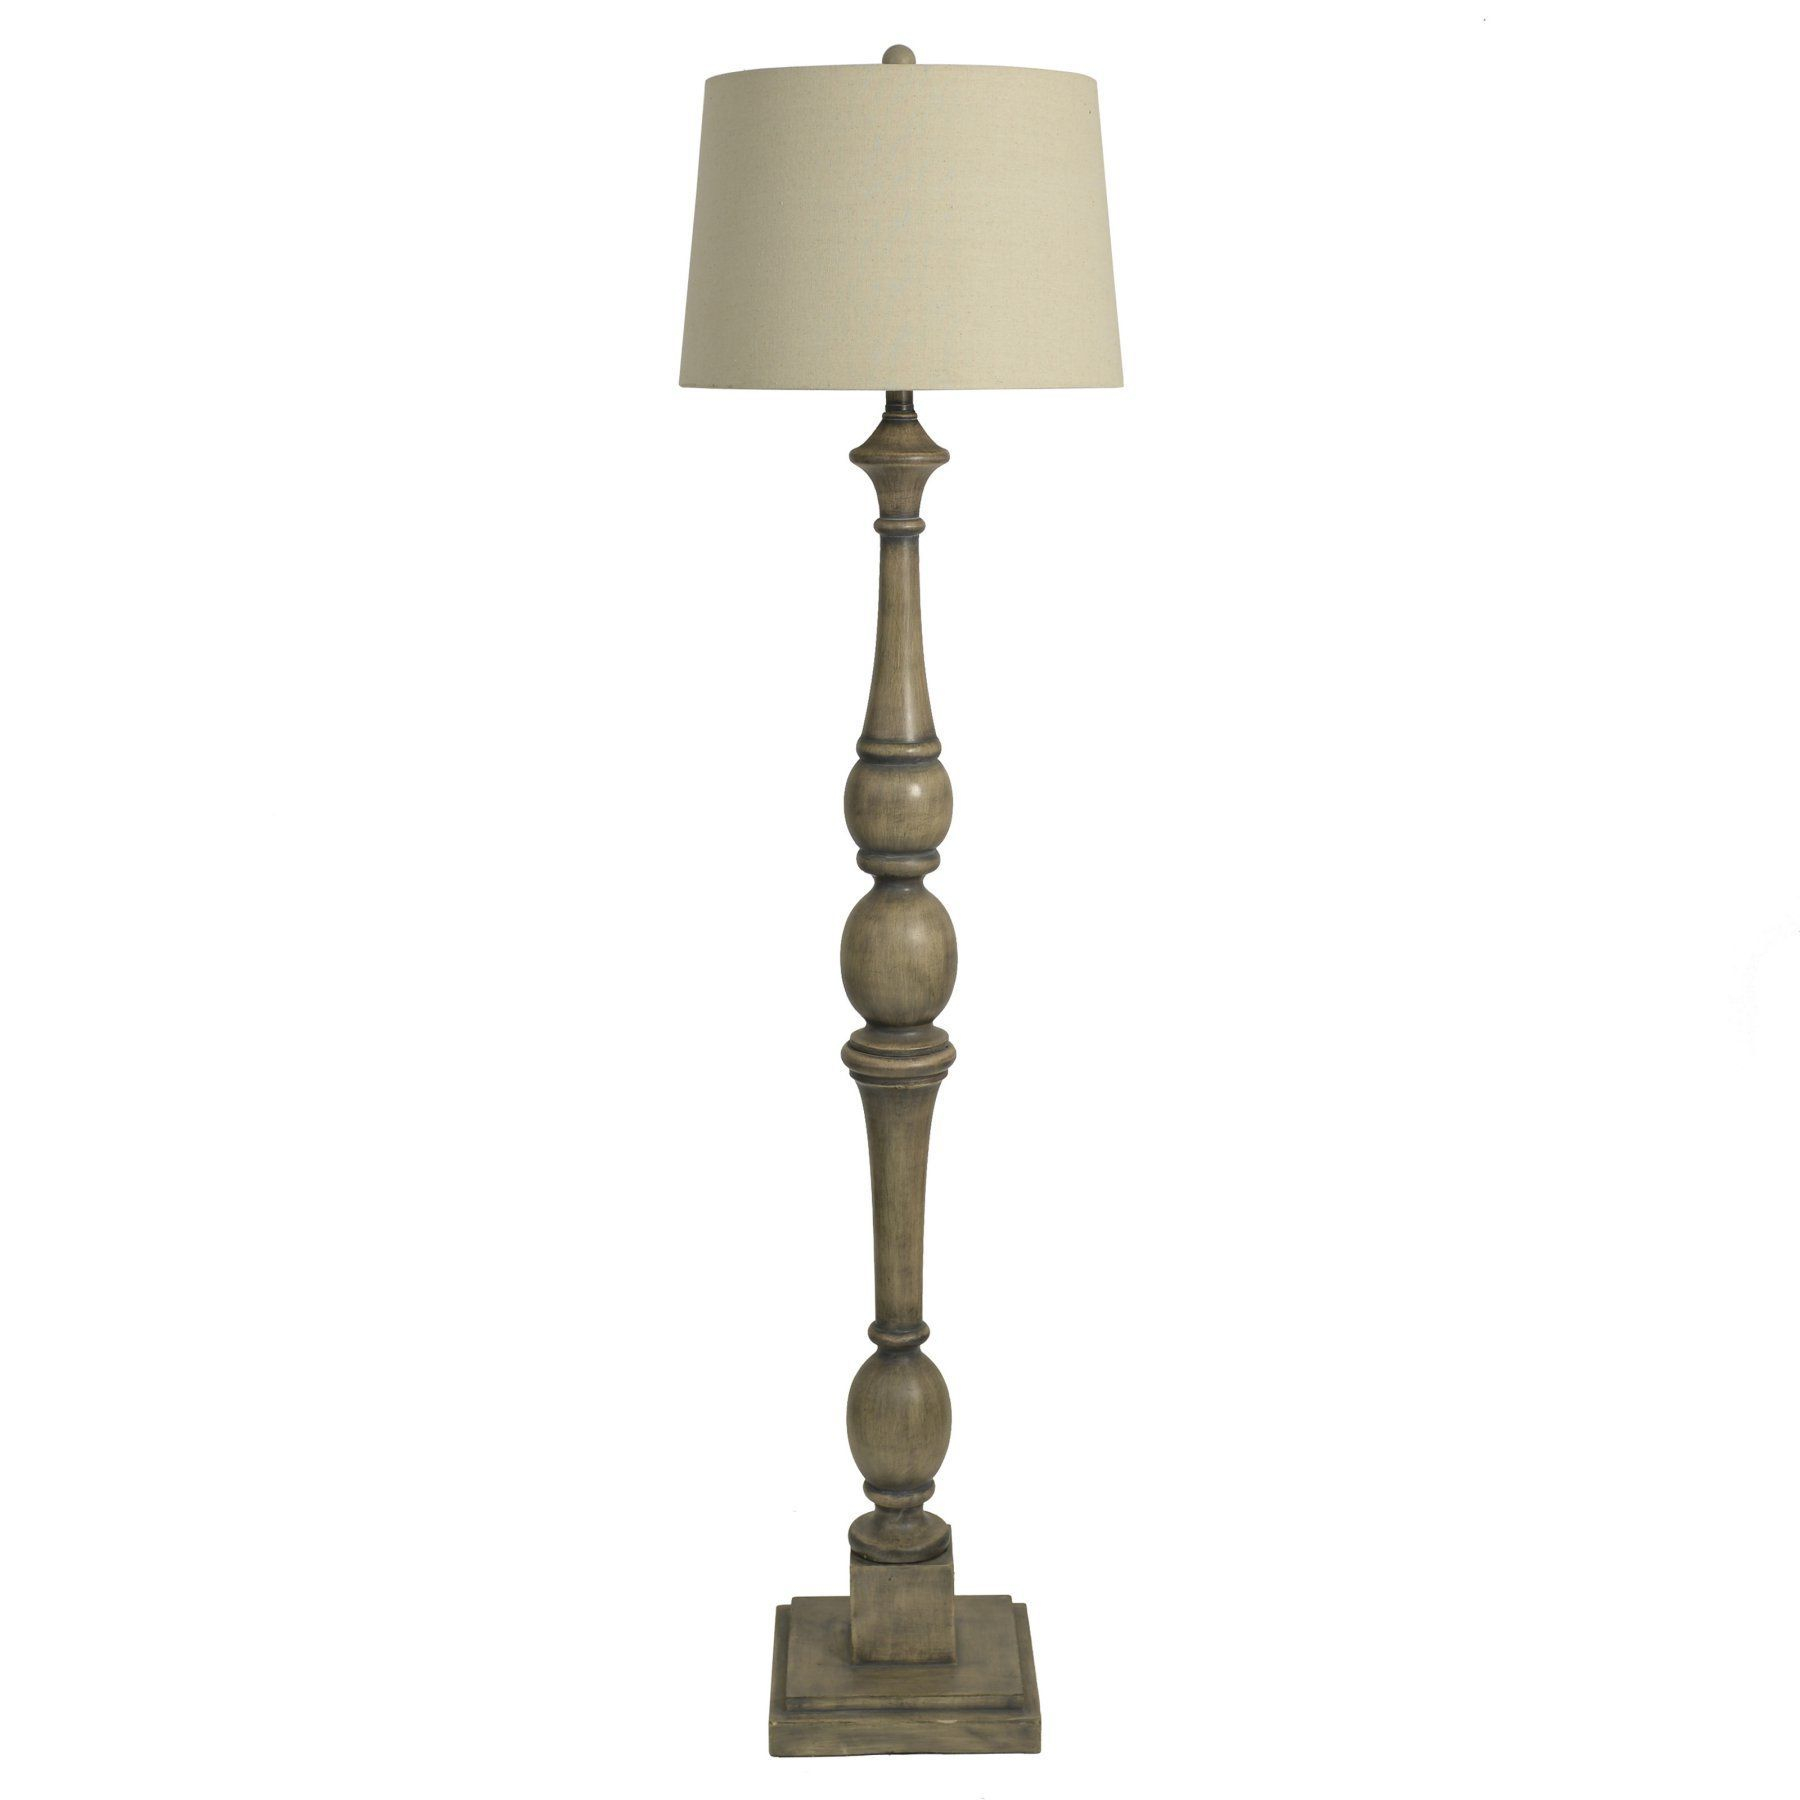 Decor Therapy Distressed Baluster Floor Lamp Pl3734 for dimensions 1800 X 1800